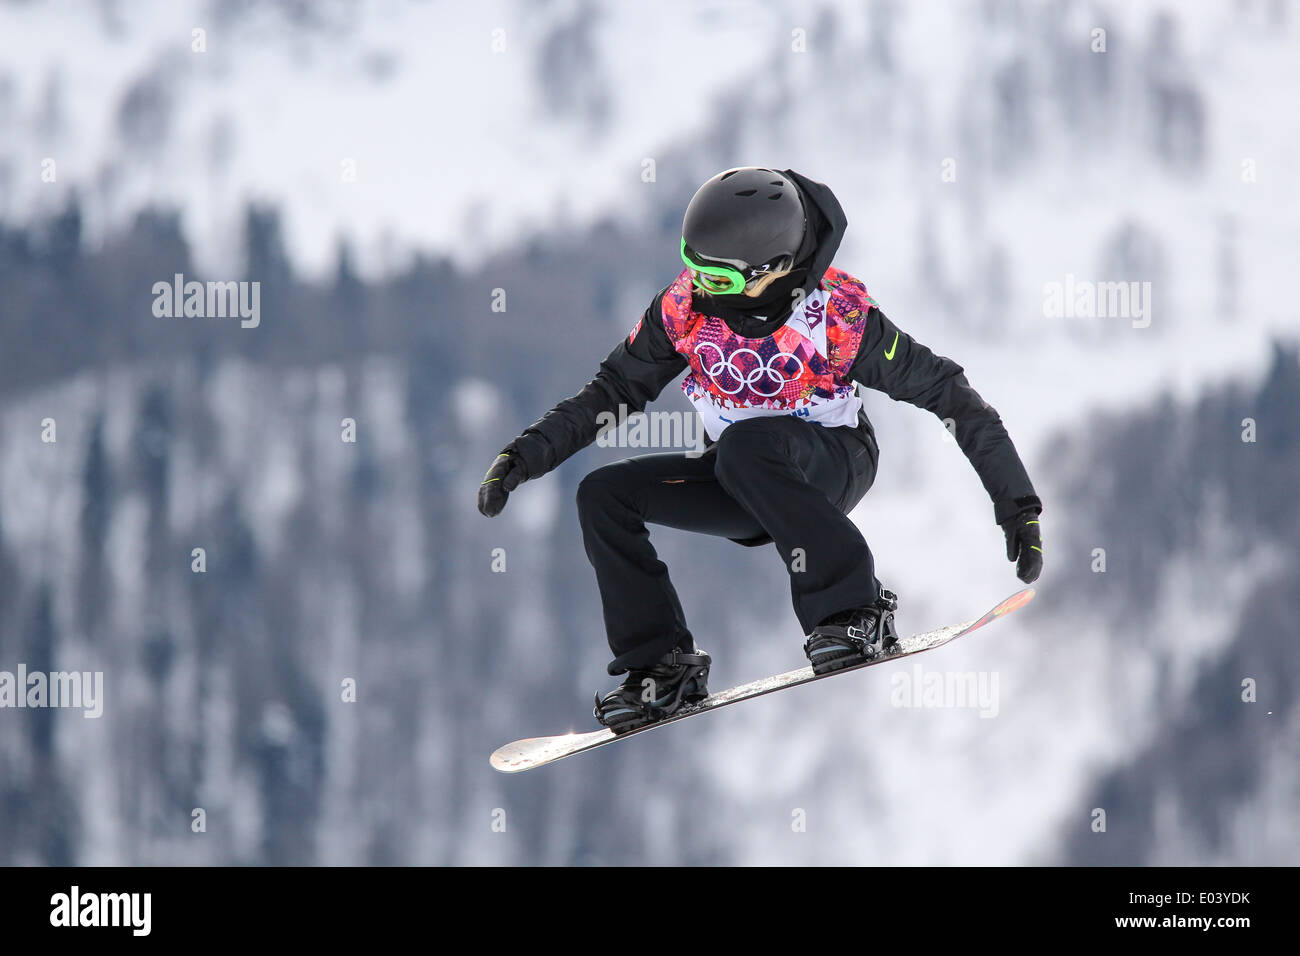 Silje Norendal competing in Women's Snowboard Slopestyle at the Olympic Winter Games, Sochi 2014 Stock Photo Alamy